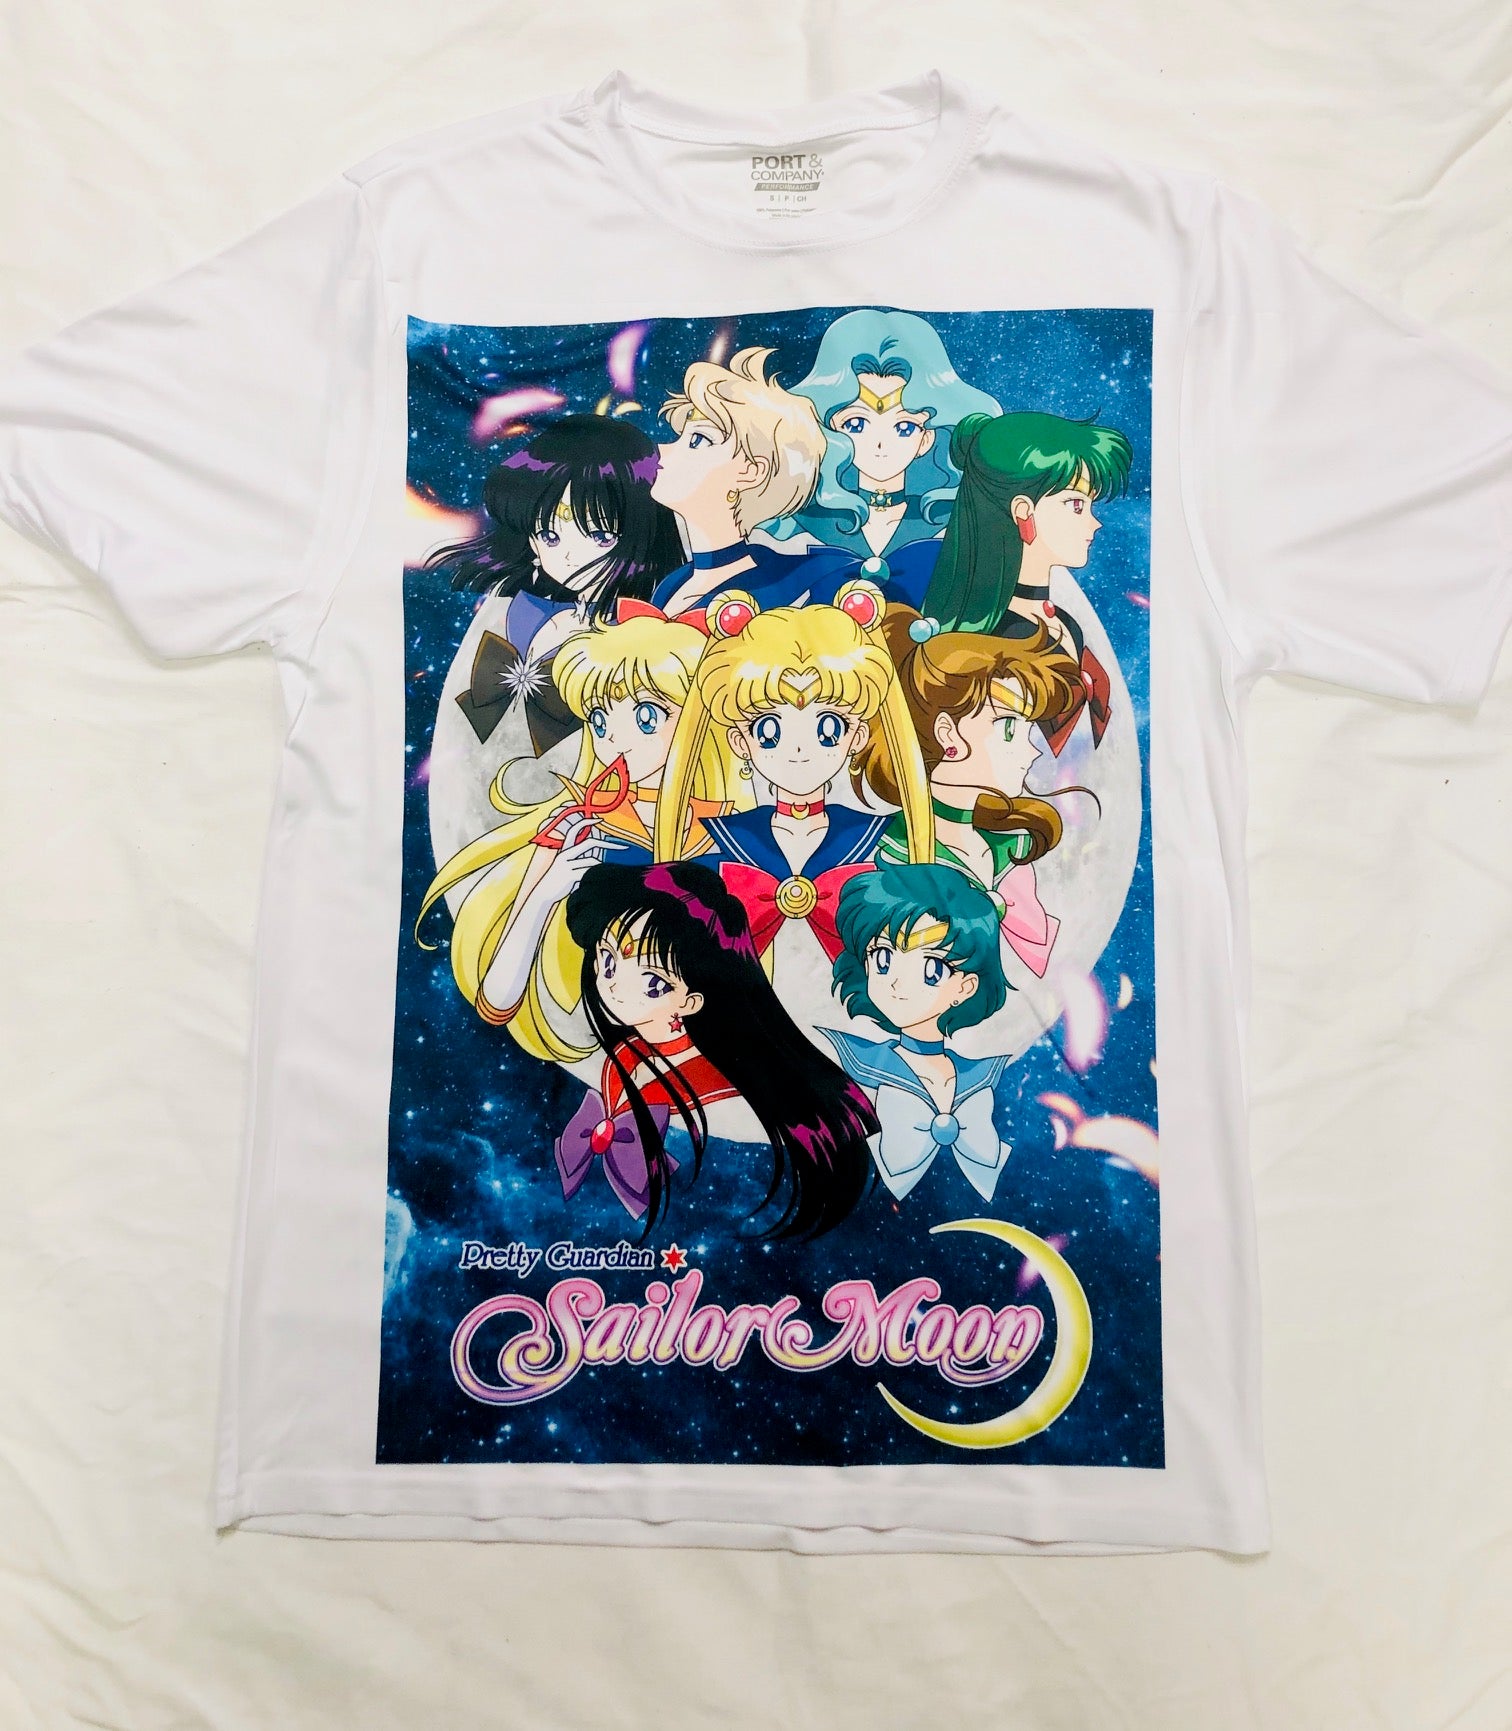 Anime Sailor Moon T-Shirt - Super Anime Store FREE SHIPPING FAST SHIPPING USA